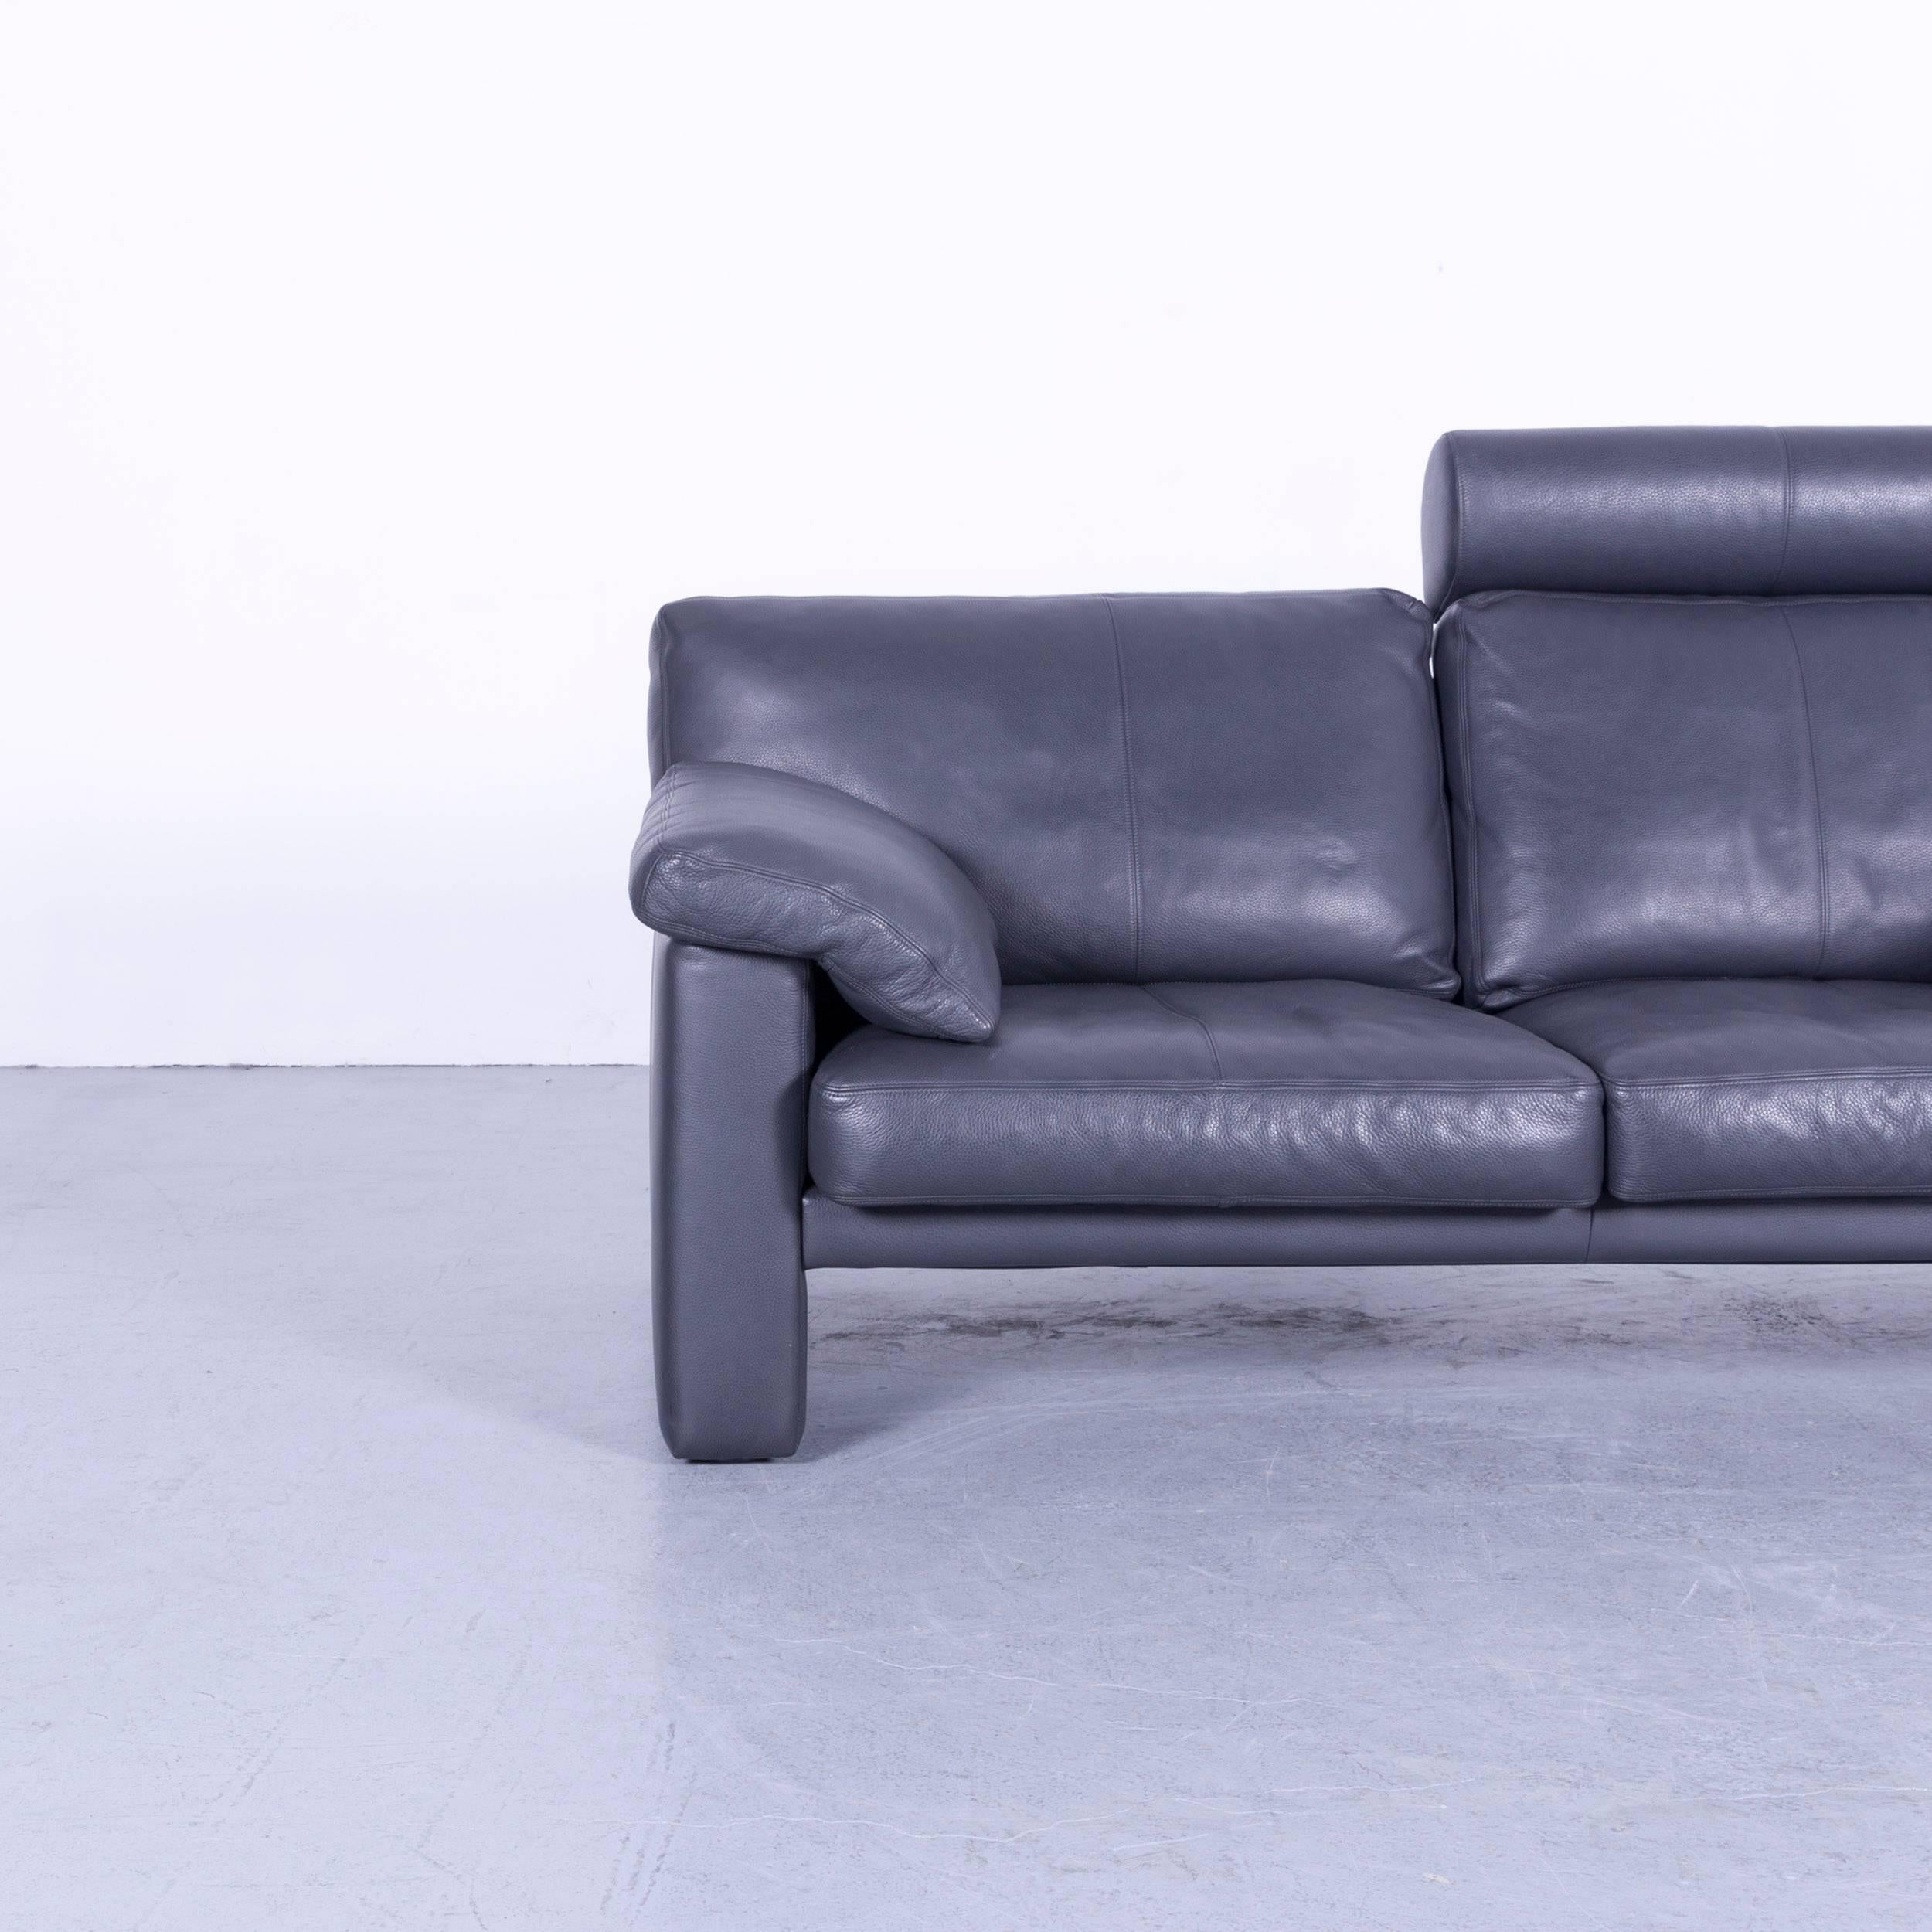 Erpo CL 300 Sofa Set of Two Leather Grey Three/Two-Seat Couch 5